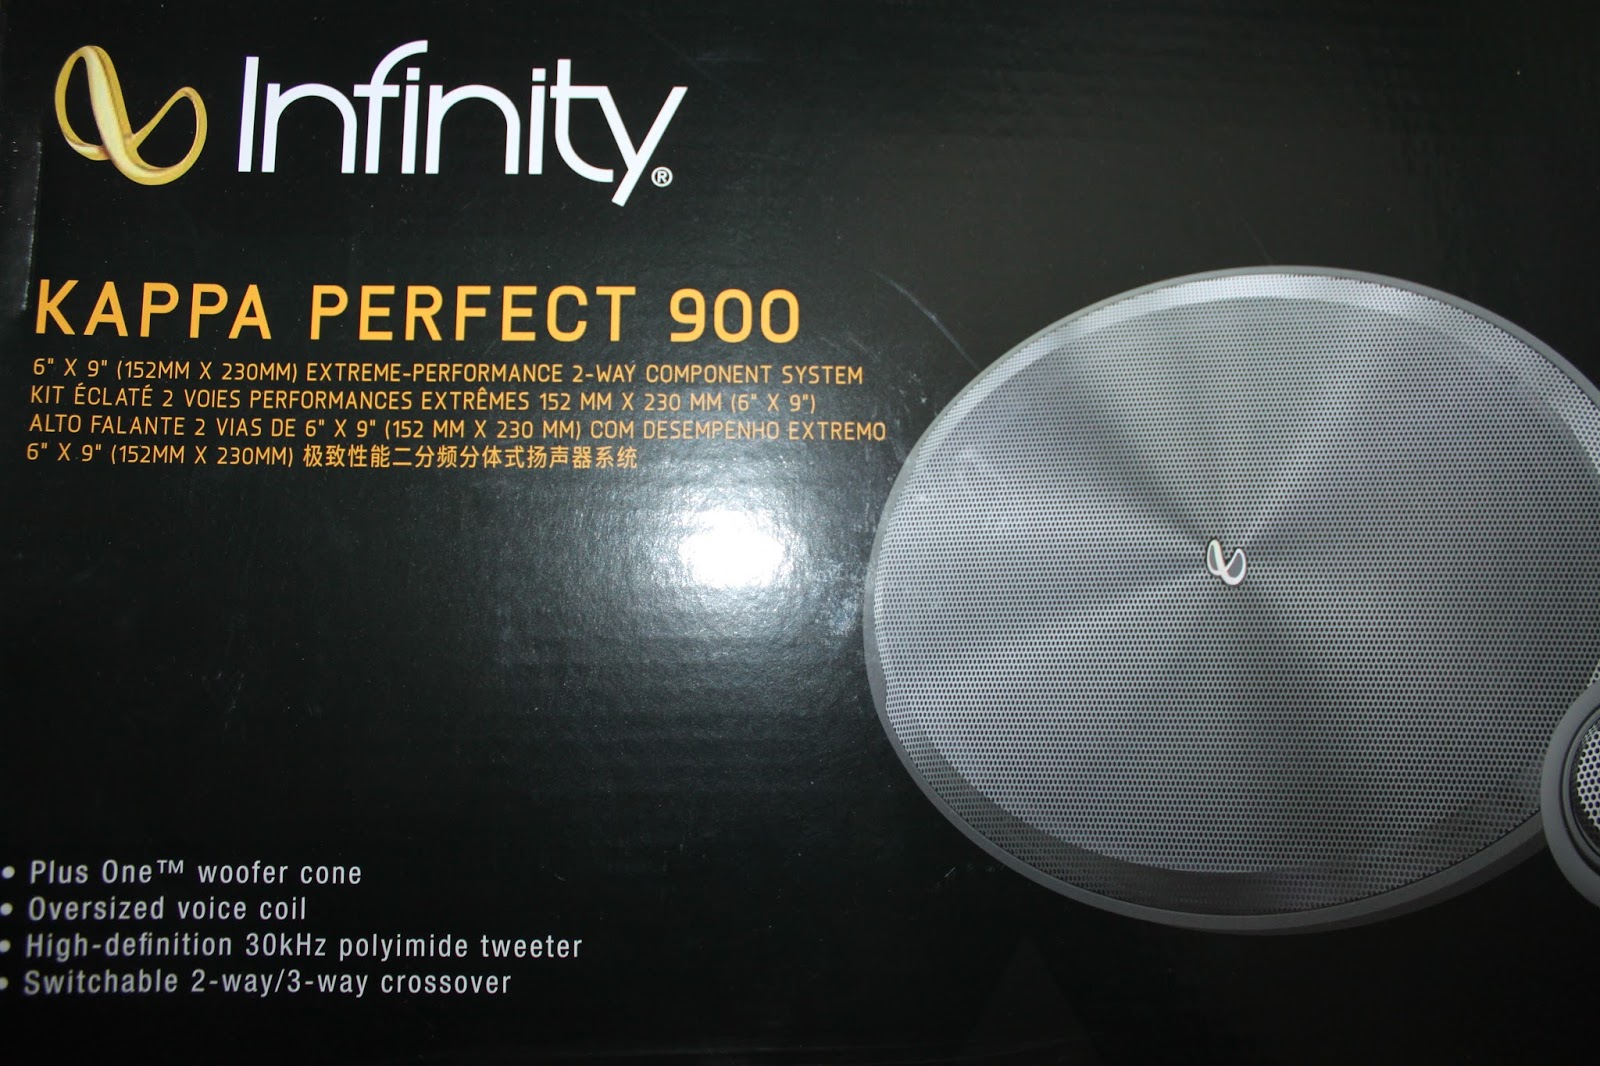 Plus: Infinity Kappa Perfect 900 and Infinity Kappa Perfect 300 Component Speaker Review